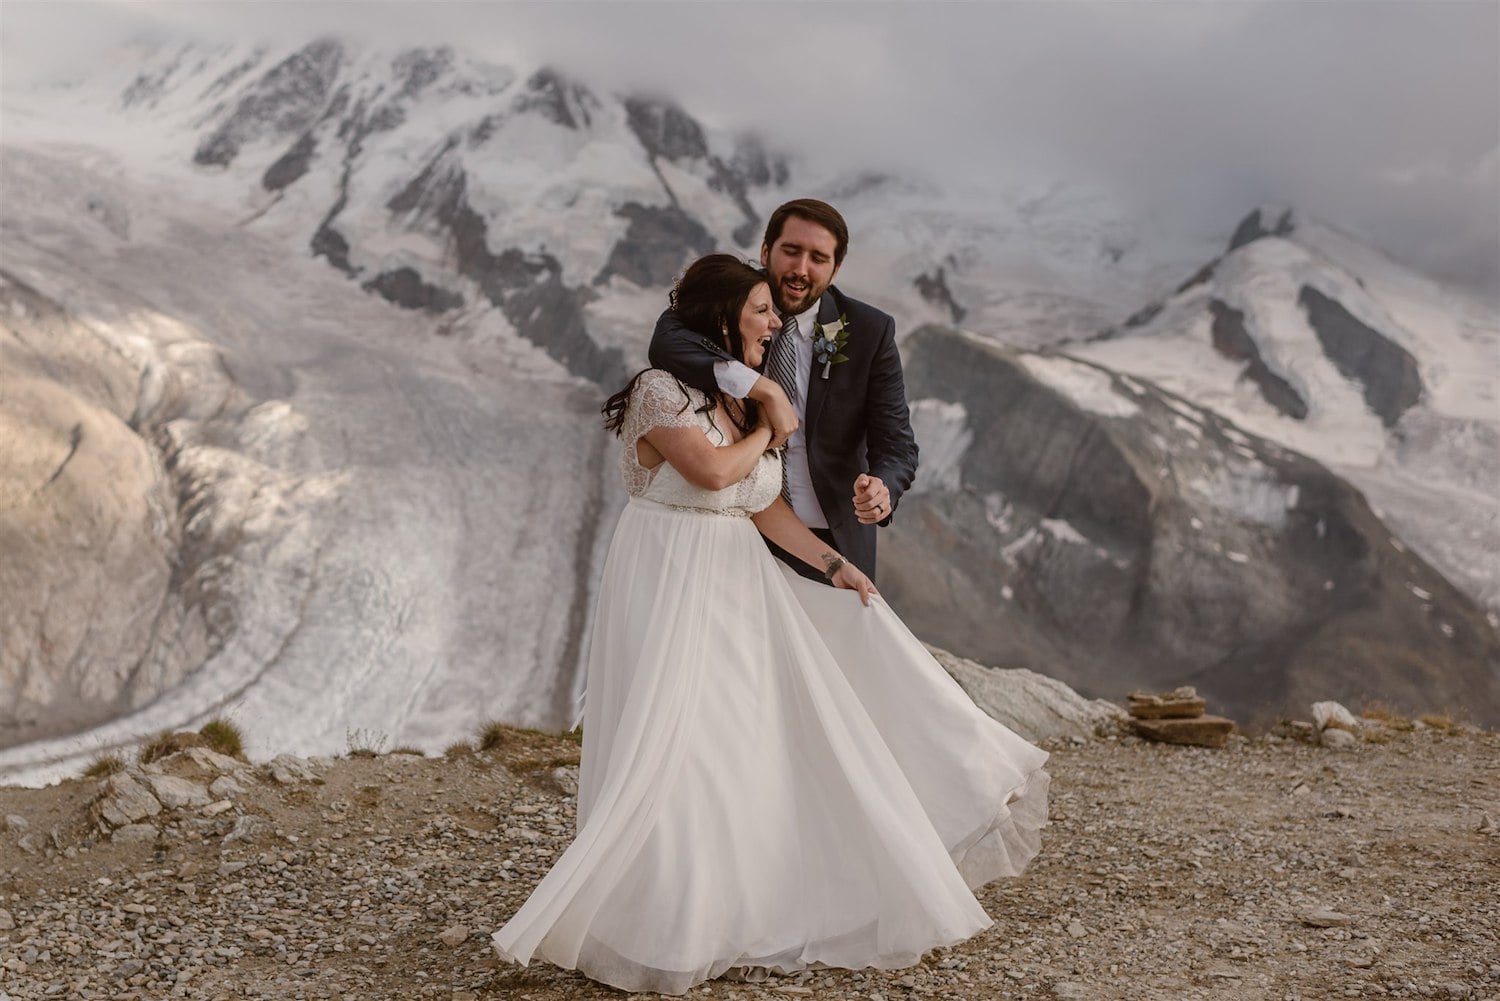 Couple dancing on the Swiss Mountains